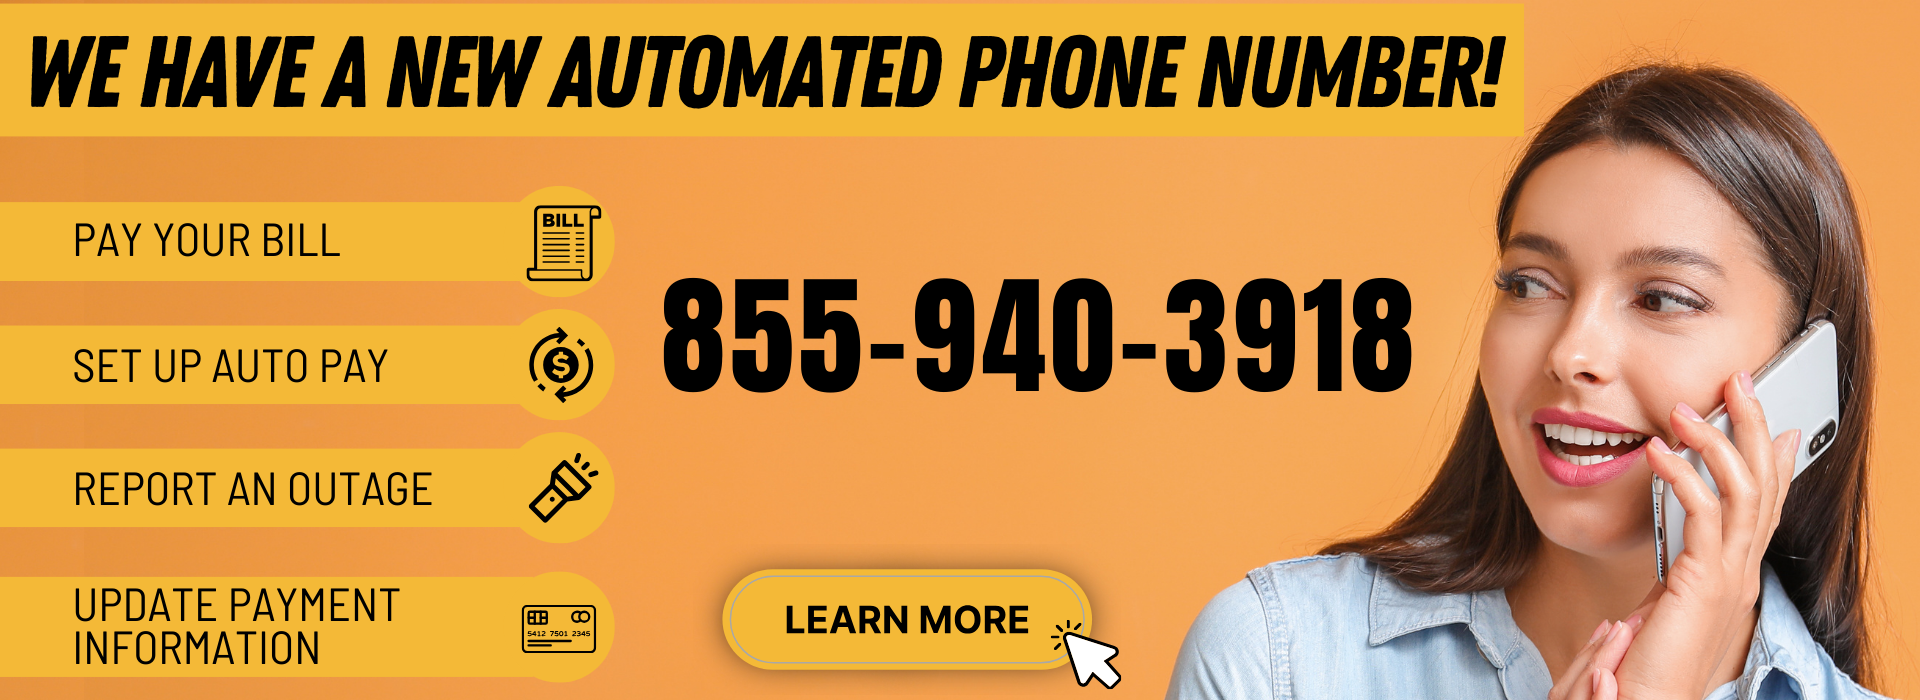 We have a new Phone Number